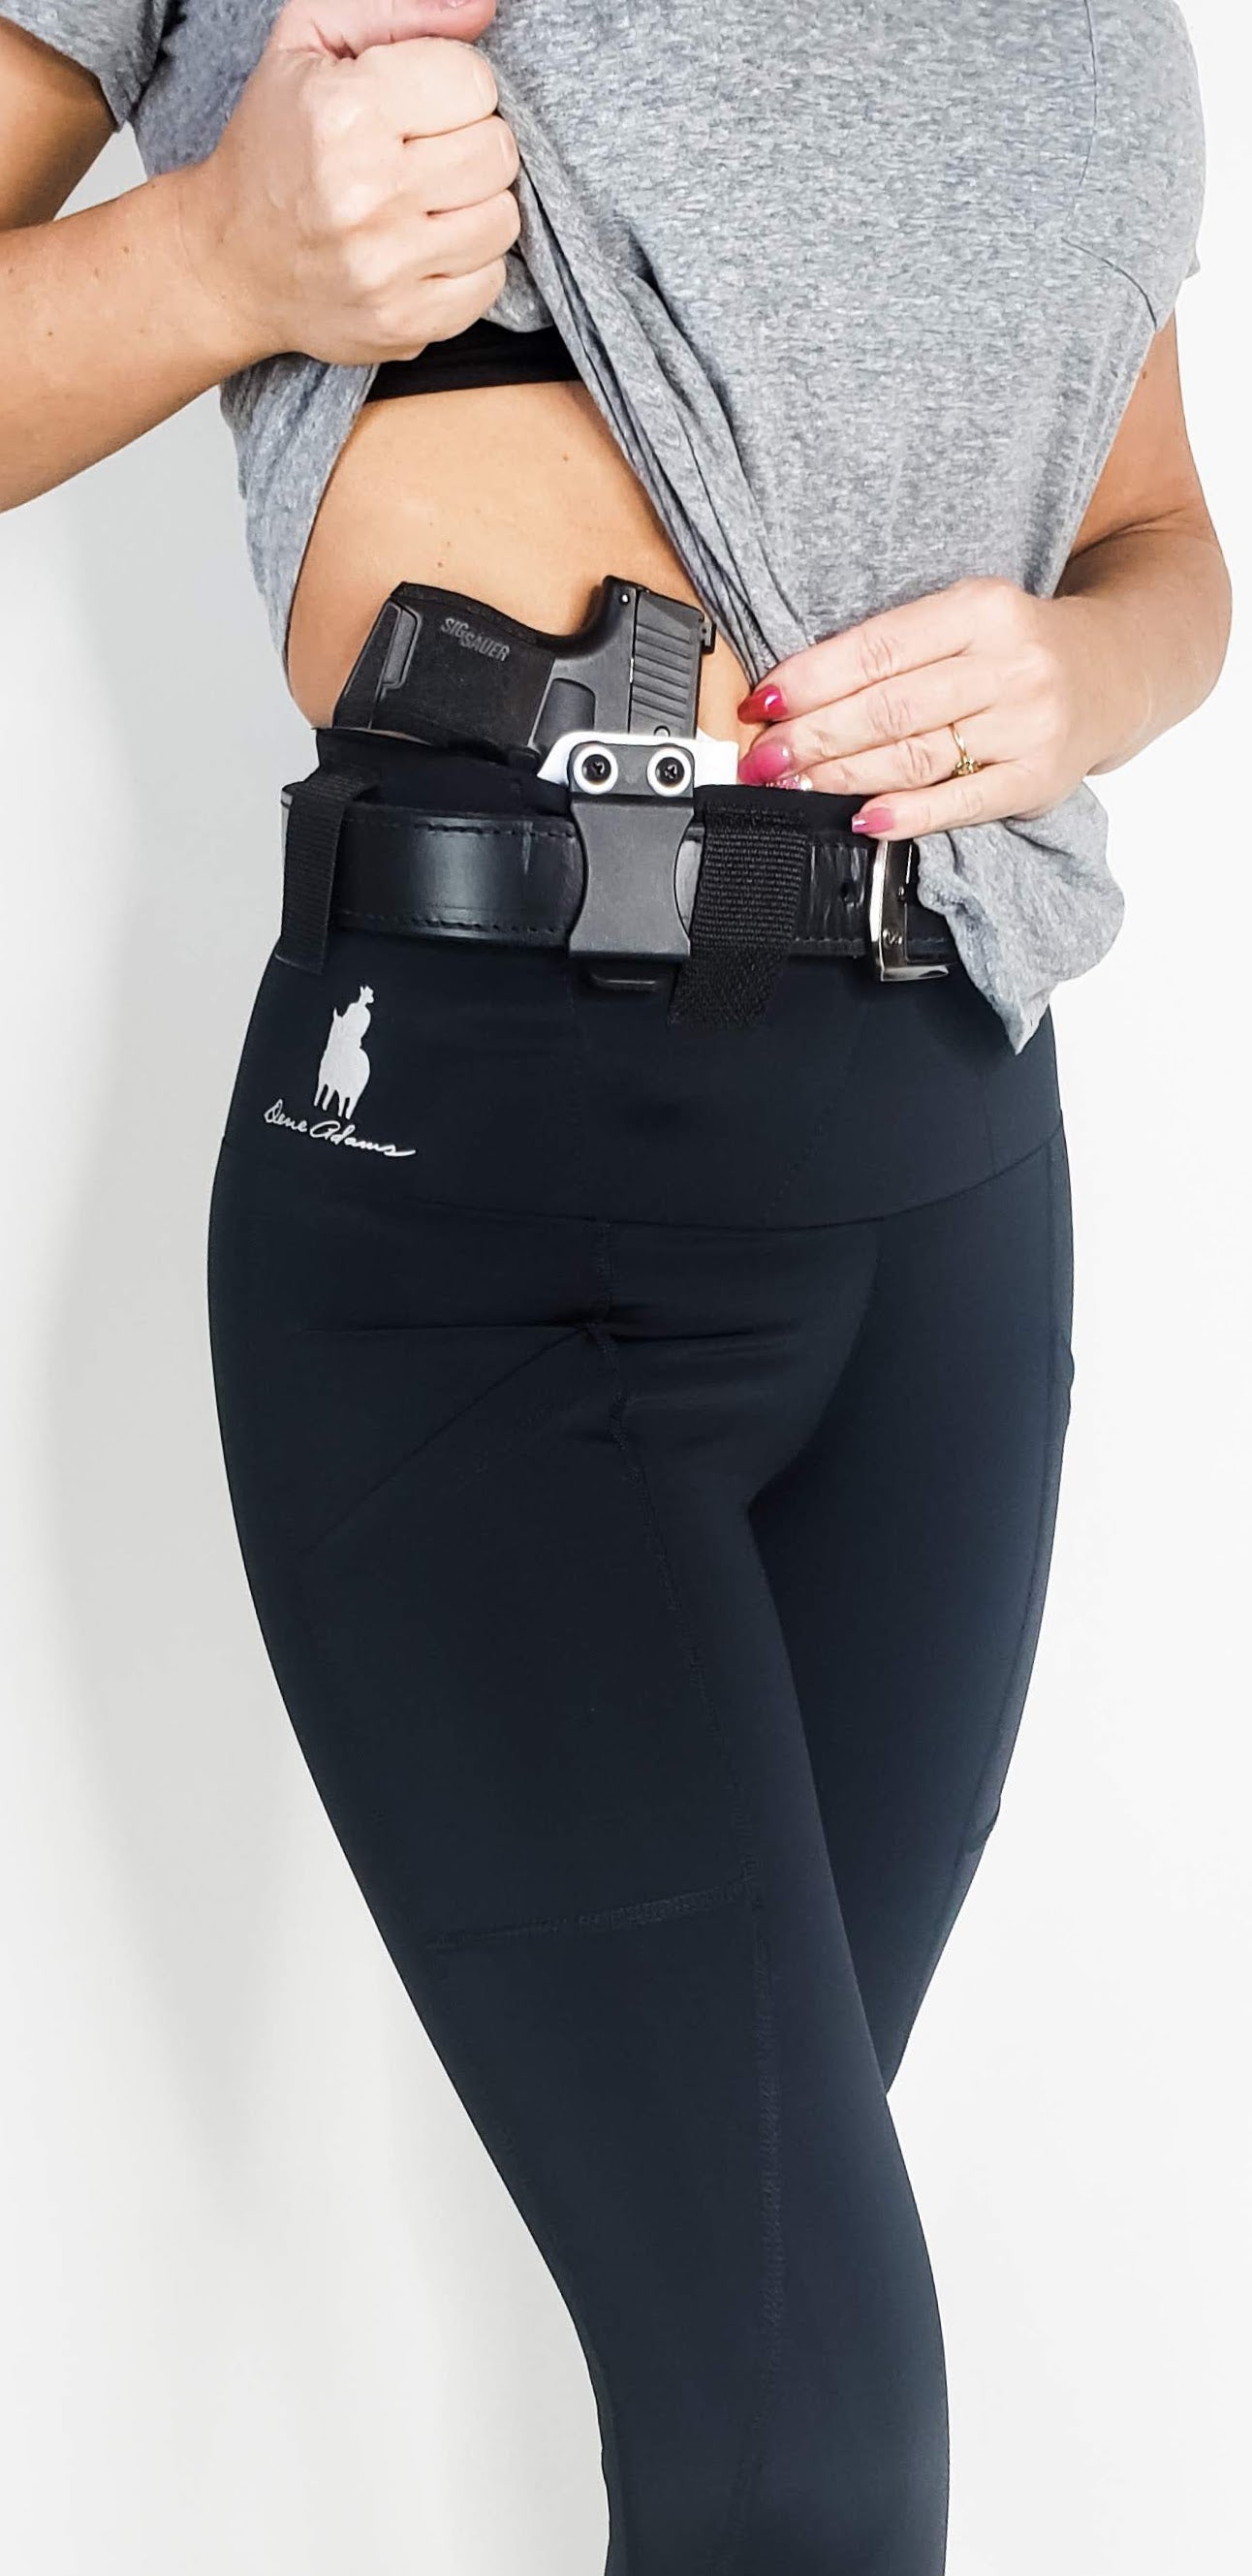 Tacticshub Belly Band Holster for Concealed Carry ? Gun Holster